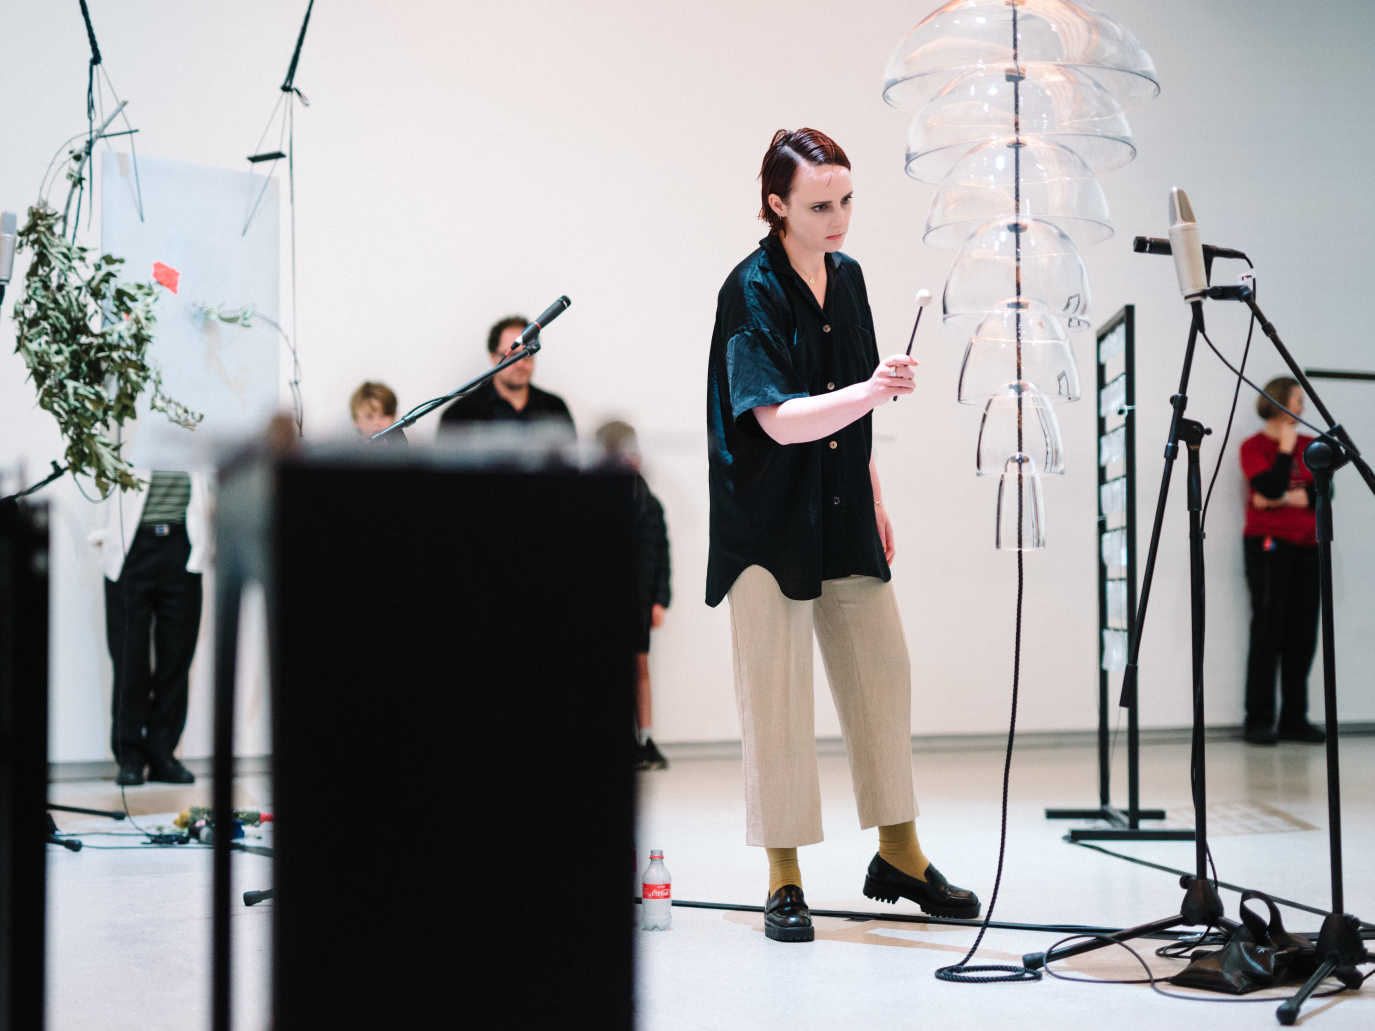 Pictured: Performance by Frances Libeau. Installation view: The painter-tailor, The 10th Walters Prize, Auckland Art Gallery, 2021. Courtesy of the artist and Michael Lett. Photograph by David St George